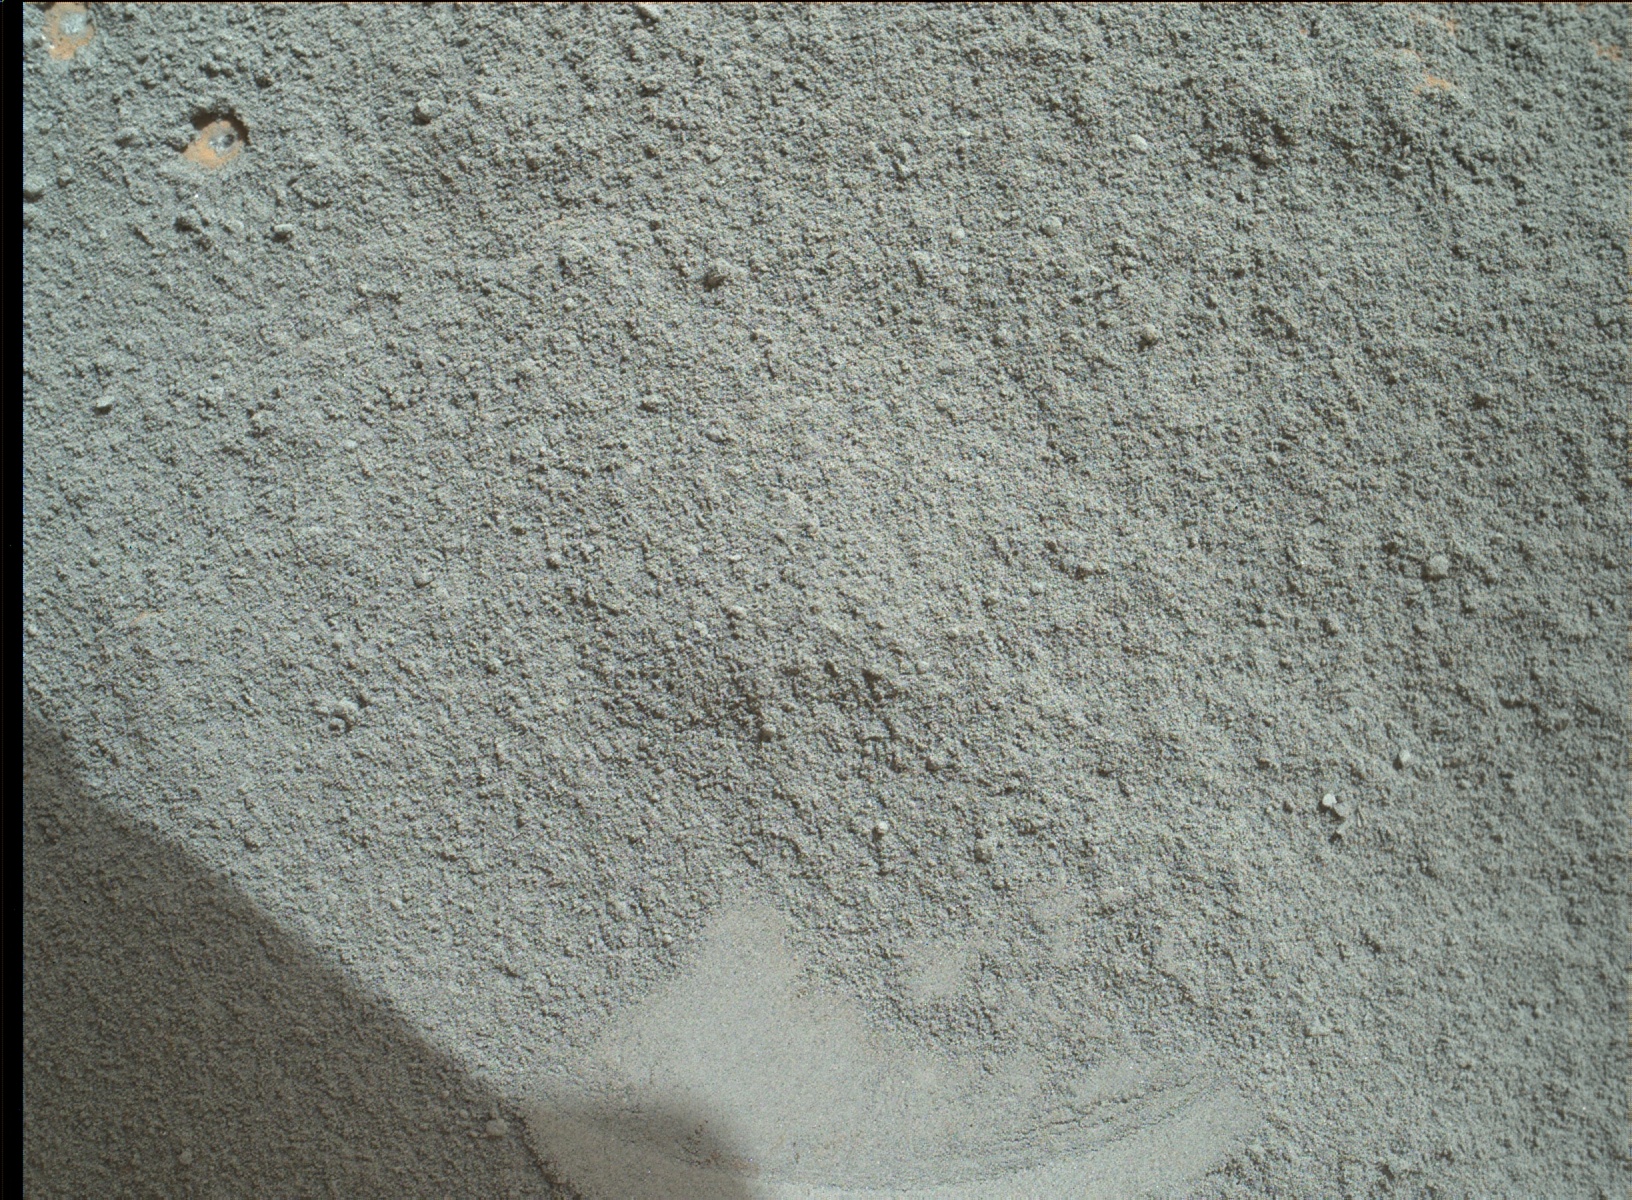 Nasa's Mars rover Curiosity acquired this image using its Mars Hand Lens Imager (MAHLI) on Sol 1360